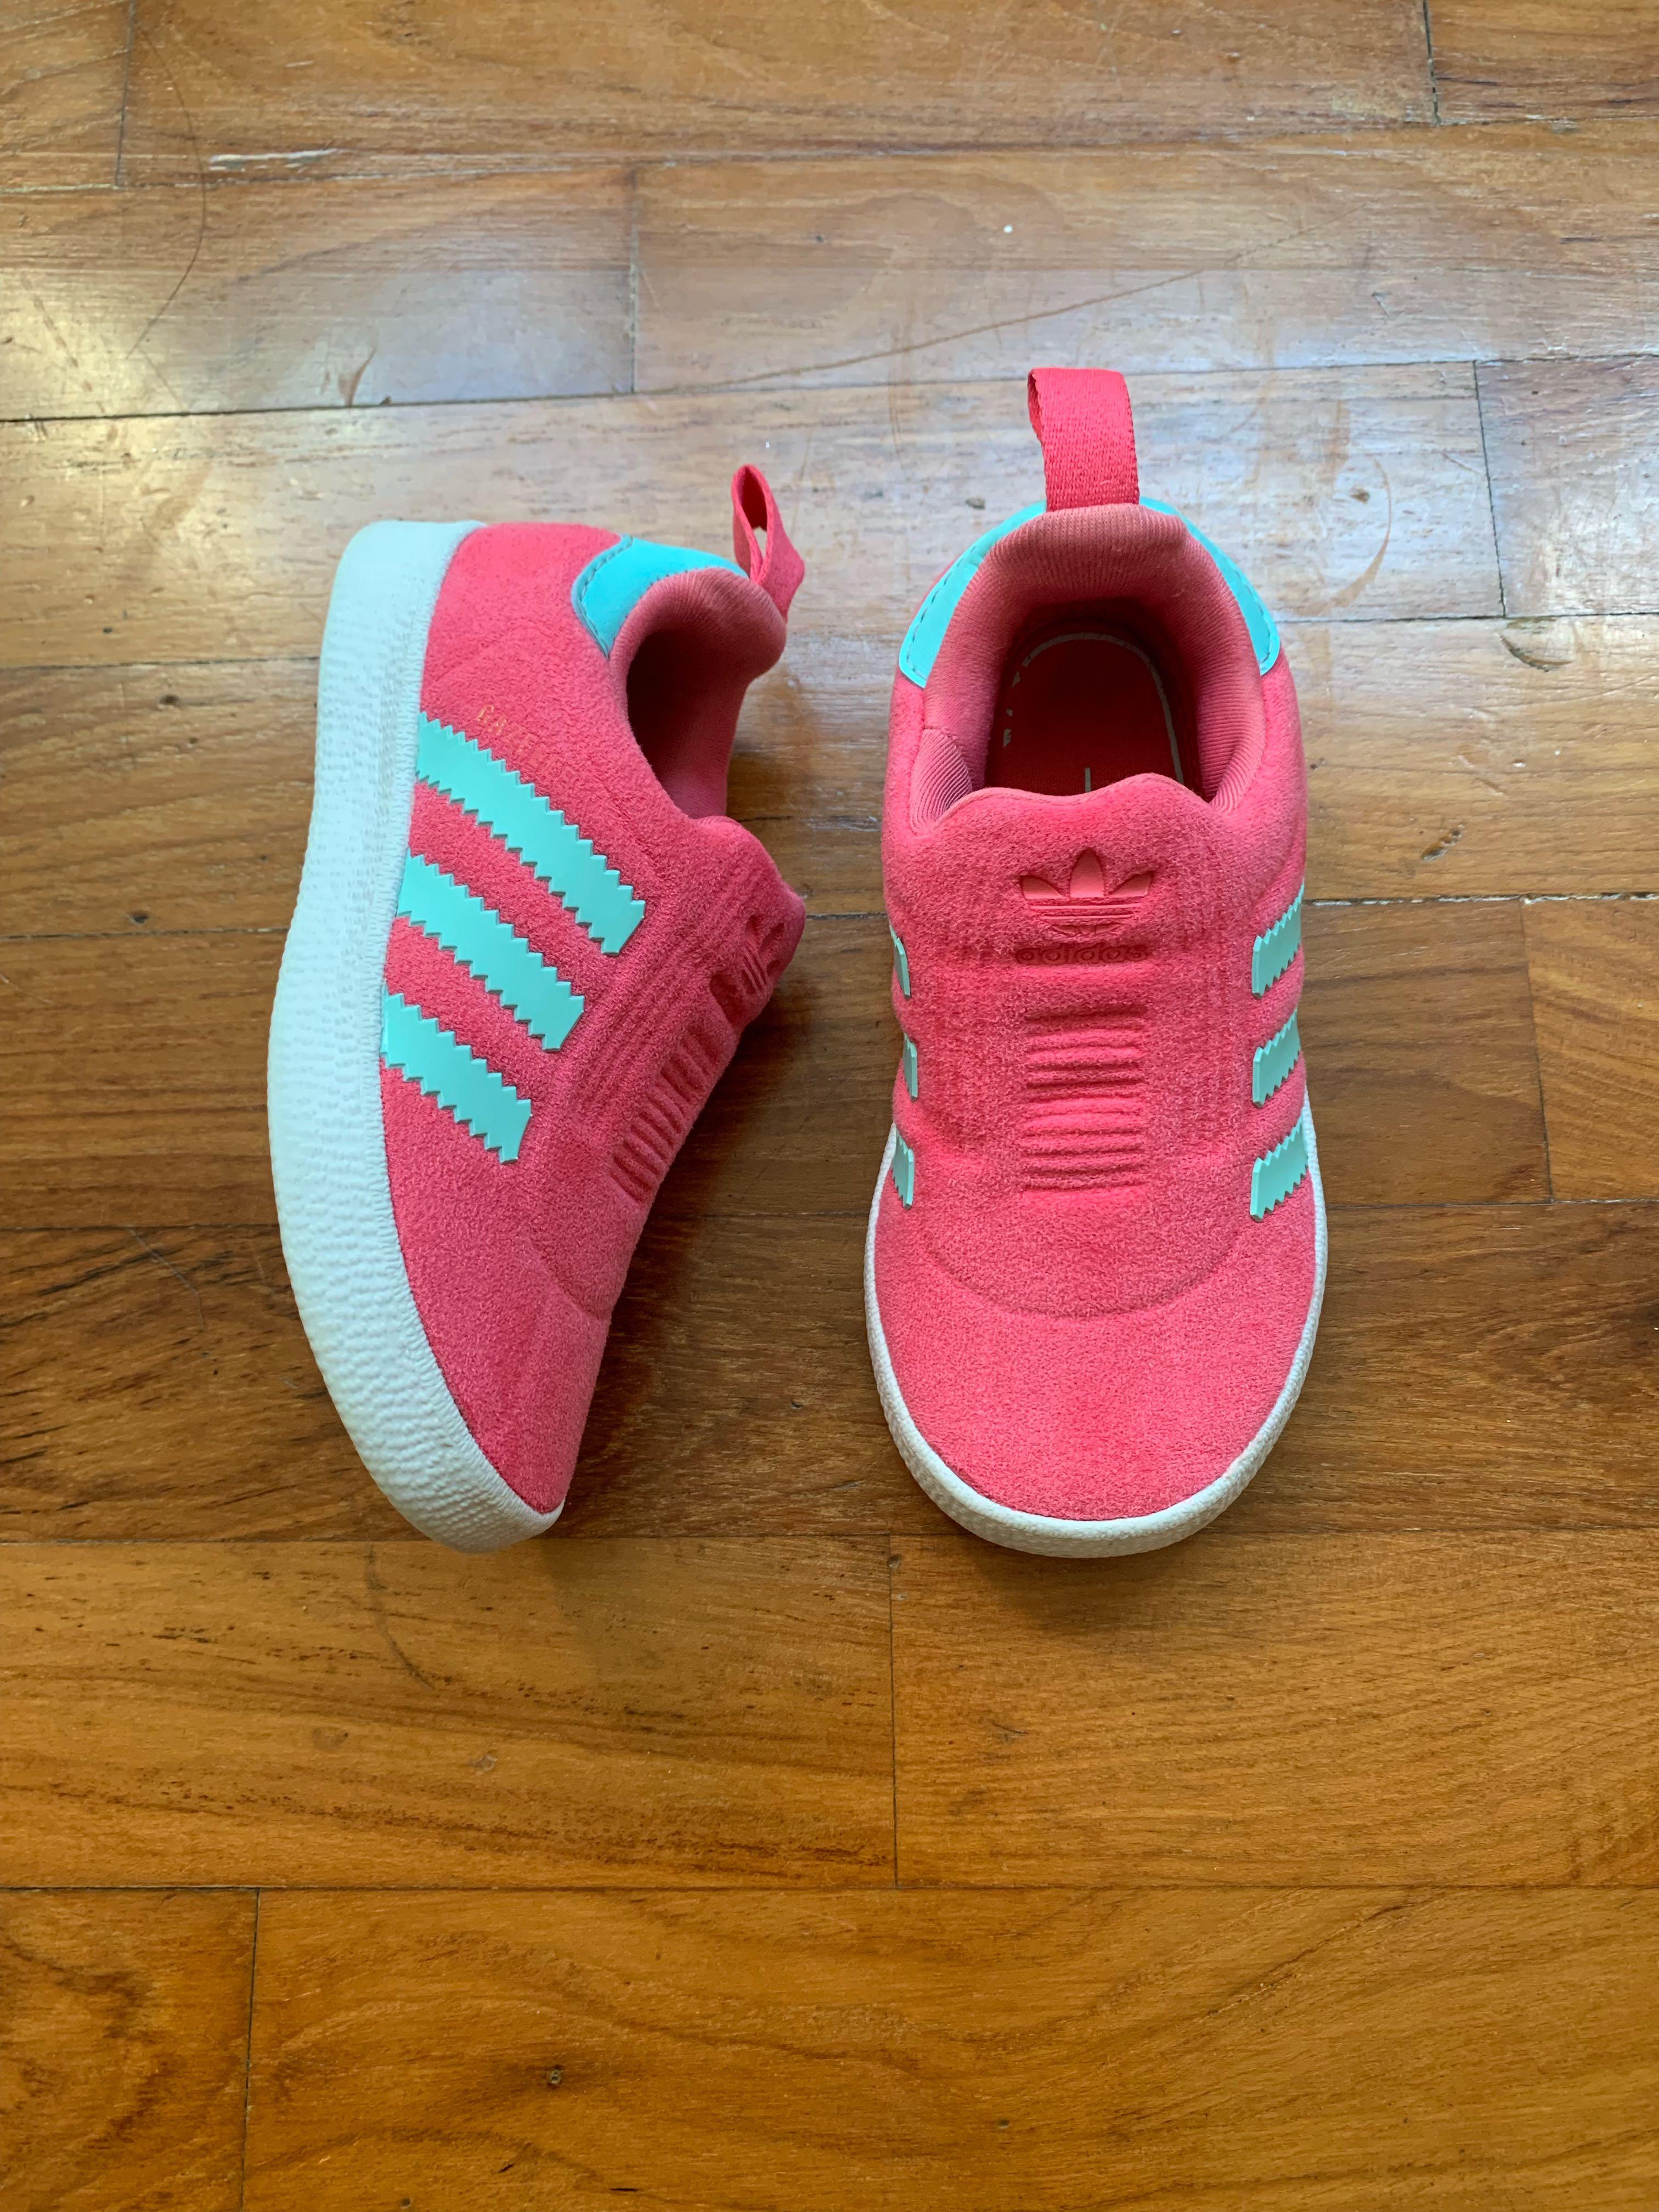 Adidas kids shoes for age 9-12months 